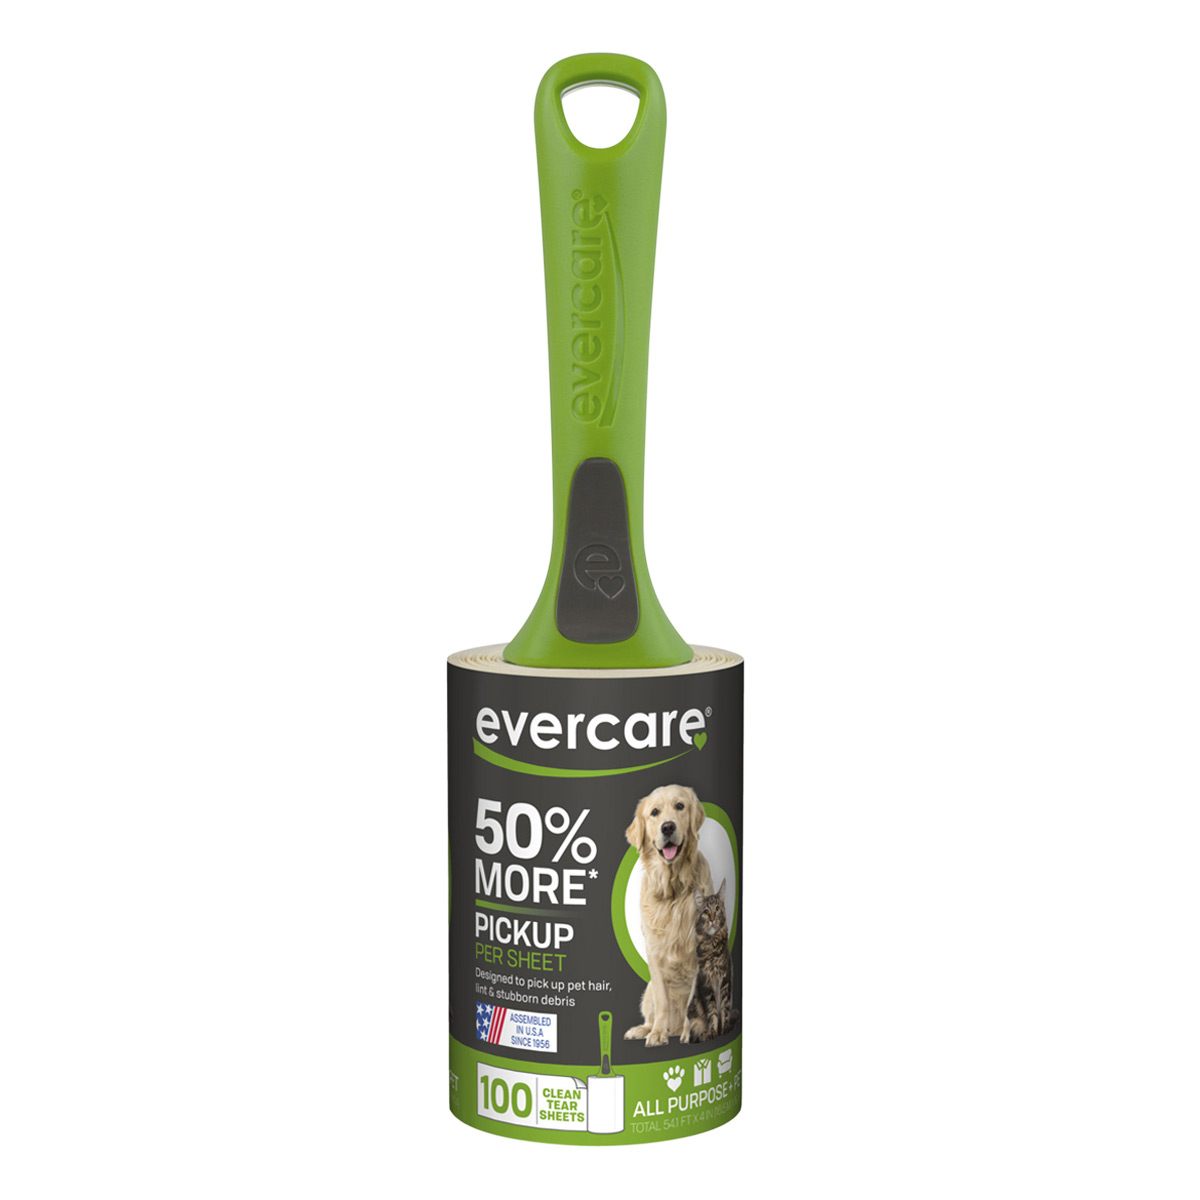 Evercare Pet Lint Roller | The Container Store